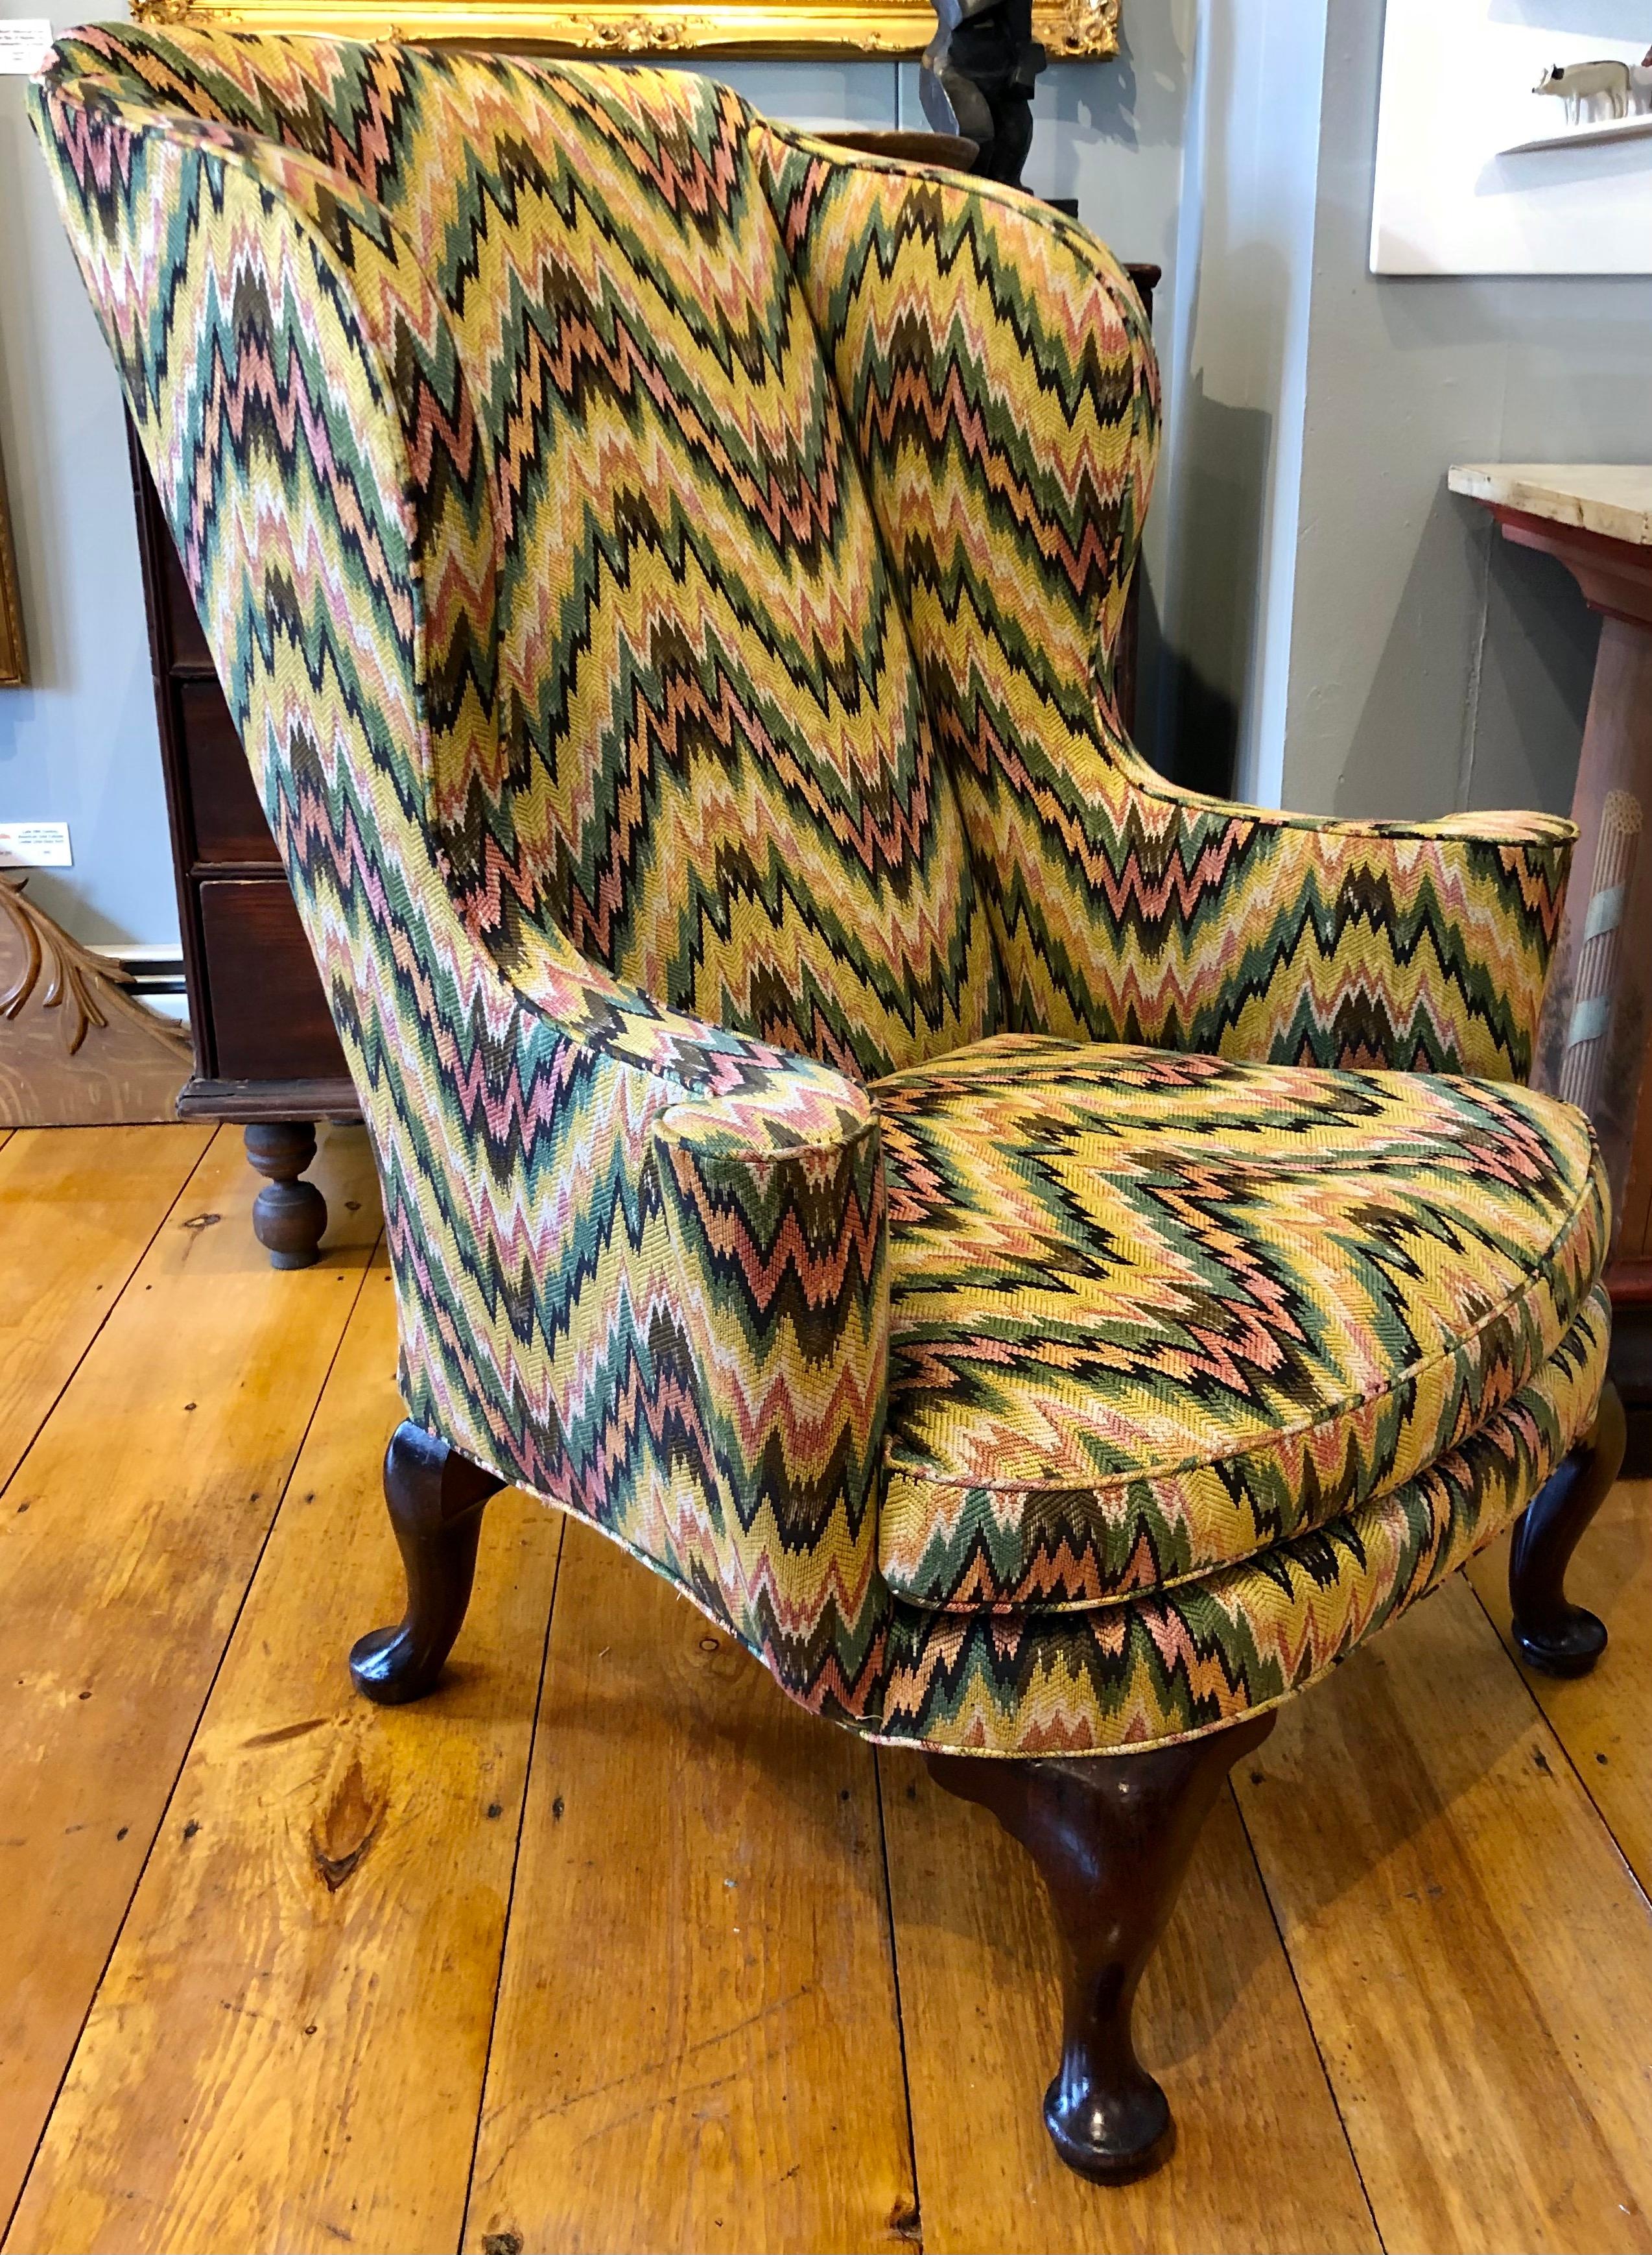 Queen Anne wing chair having rolled out arms with cones and re-upholstered in flame stitch fabric, all set on 4 cabriole legs ending in pad feet, circa mid-18th century. Most likely American, but could be English.

